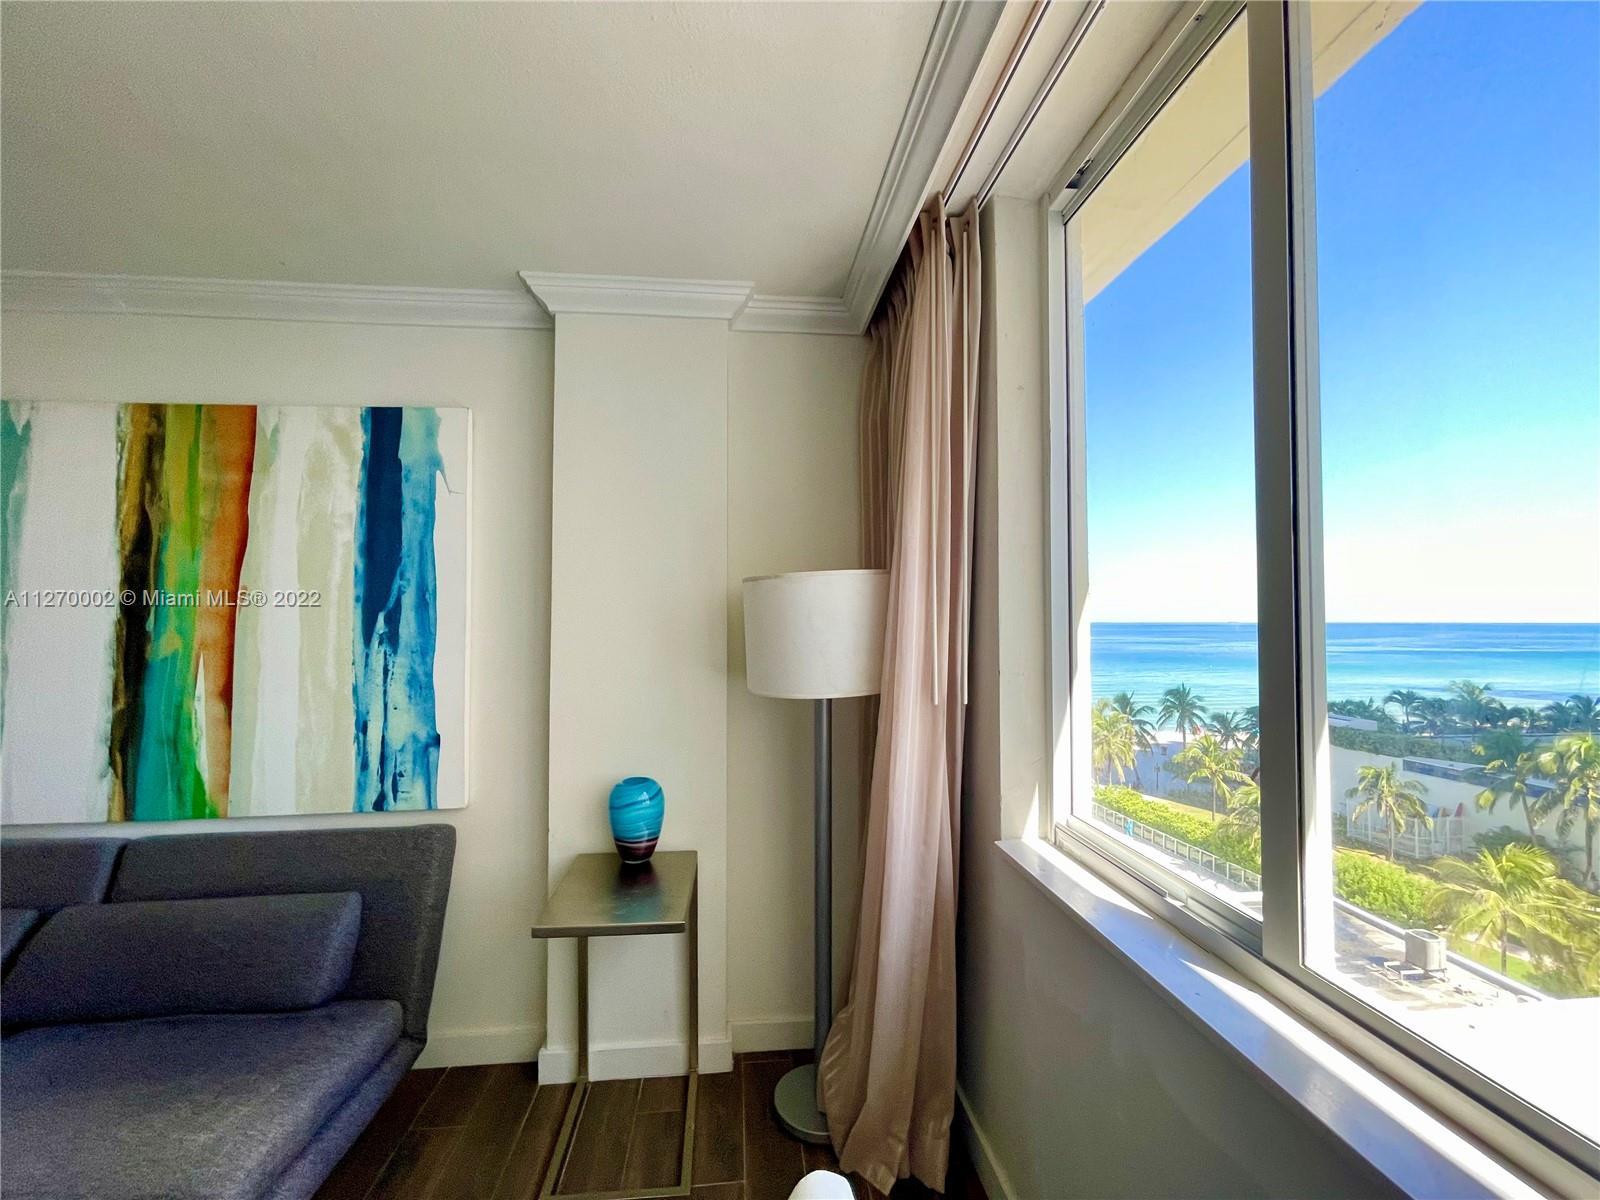 BEAUTIFUL AND REMODELED UNIT WITH BREATHTAKING OCEAN VIEW*** FULLY FURNISHED AND EQUIPMENTED***DECOR